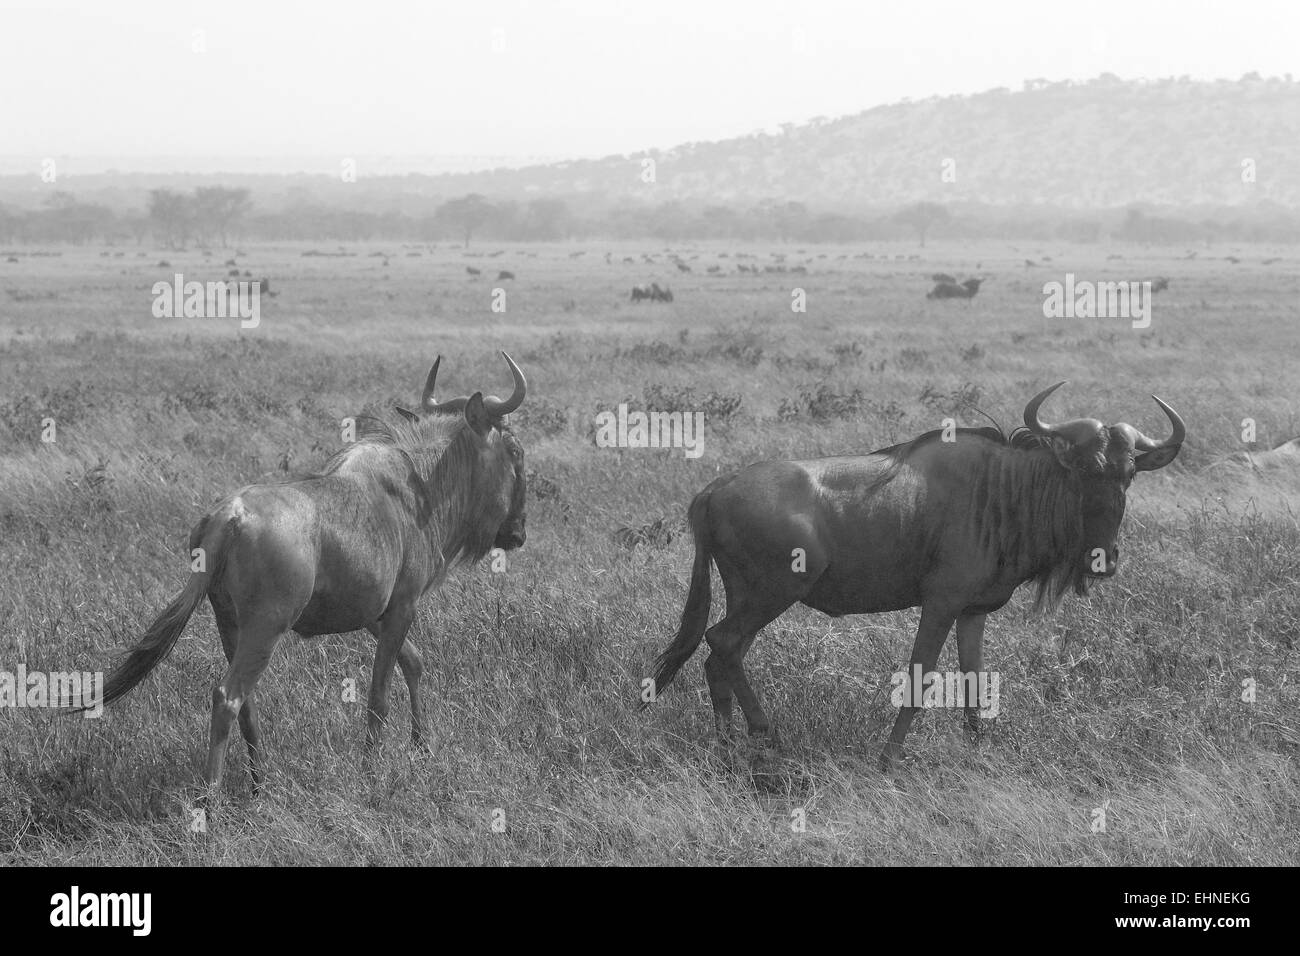 Two blue wildebeests, Connochaetes taurinus, walking in the savannah in Ngorongoro Conservation Area, Tanzania. Black and white  Stock Photo